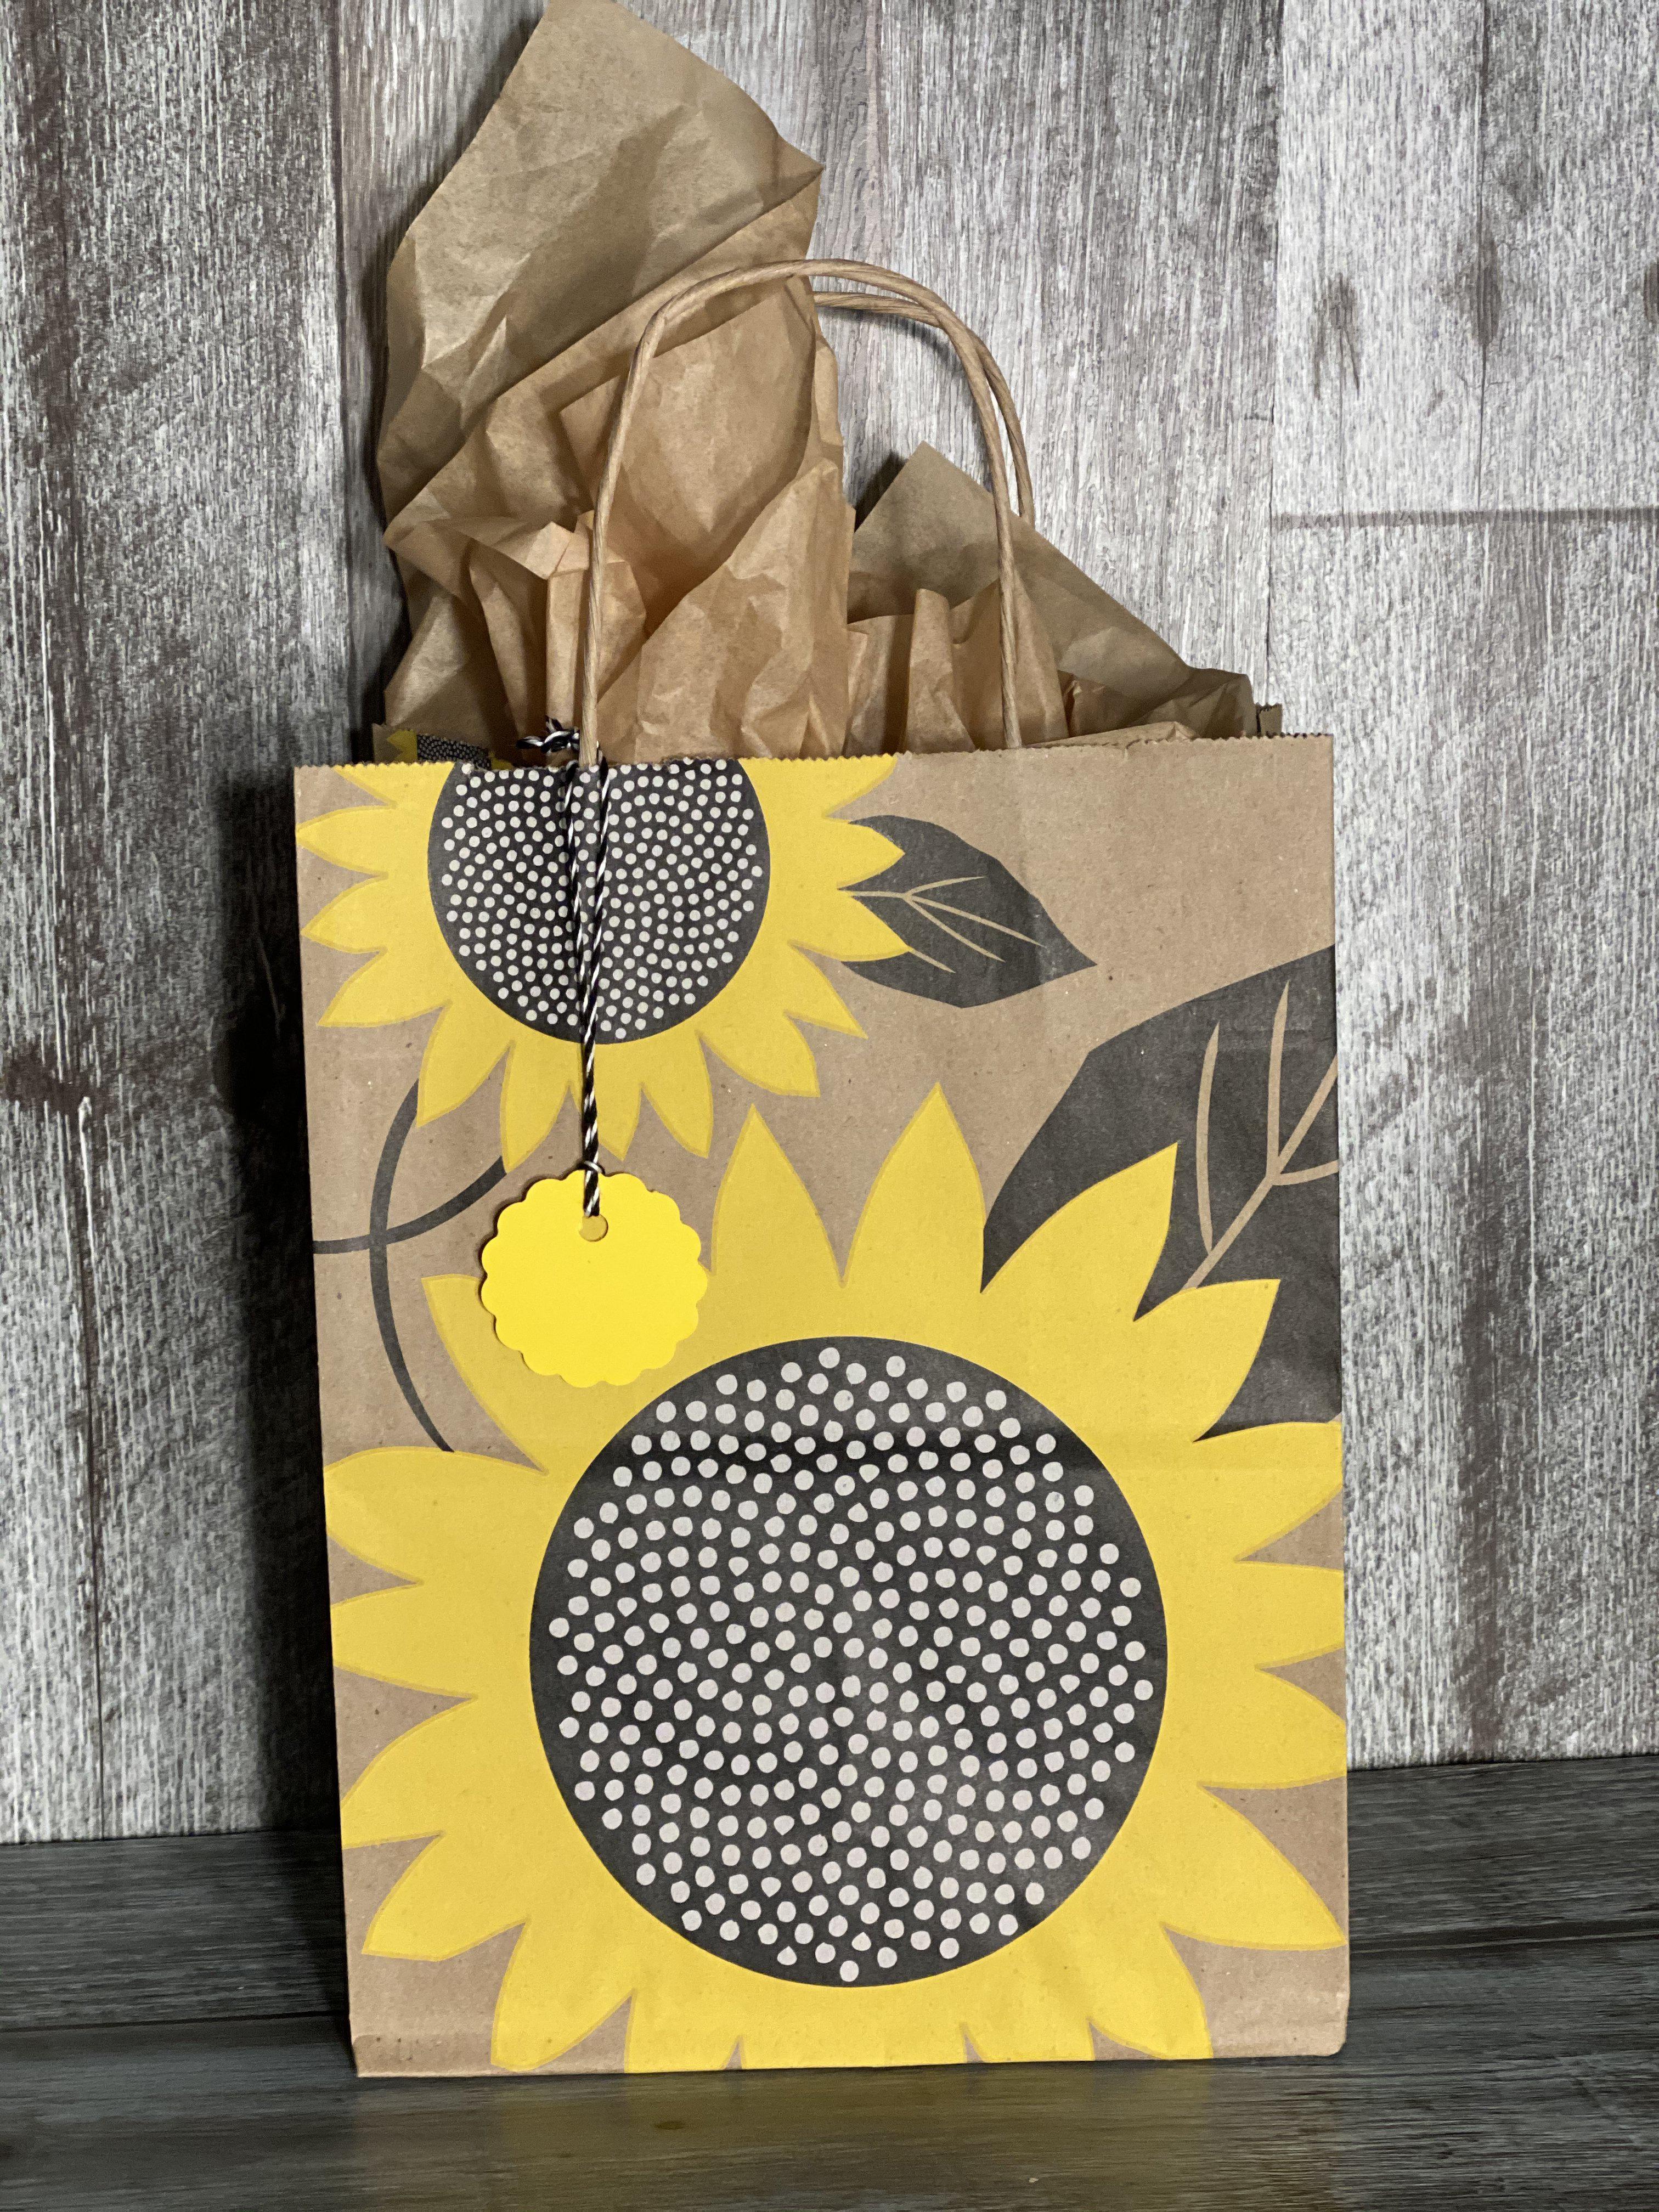 Gift Baskets by Debbie Yellow Sunflower Gift Bags Tissue Paper Tags All Occasion 3 Sets